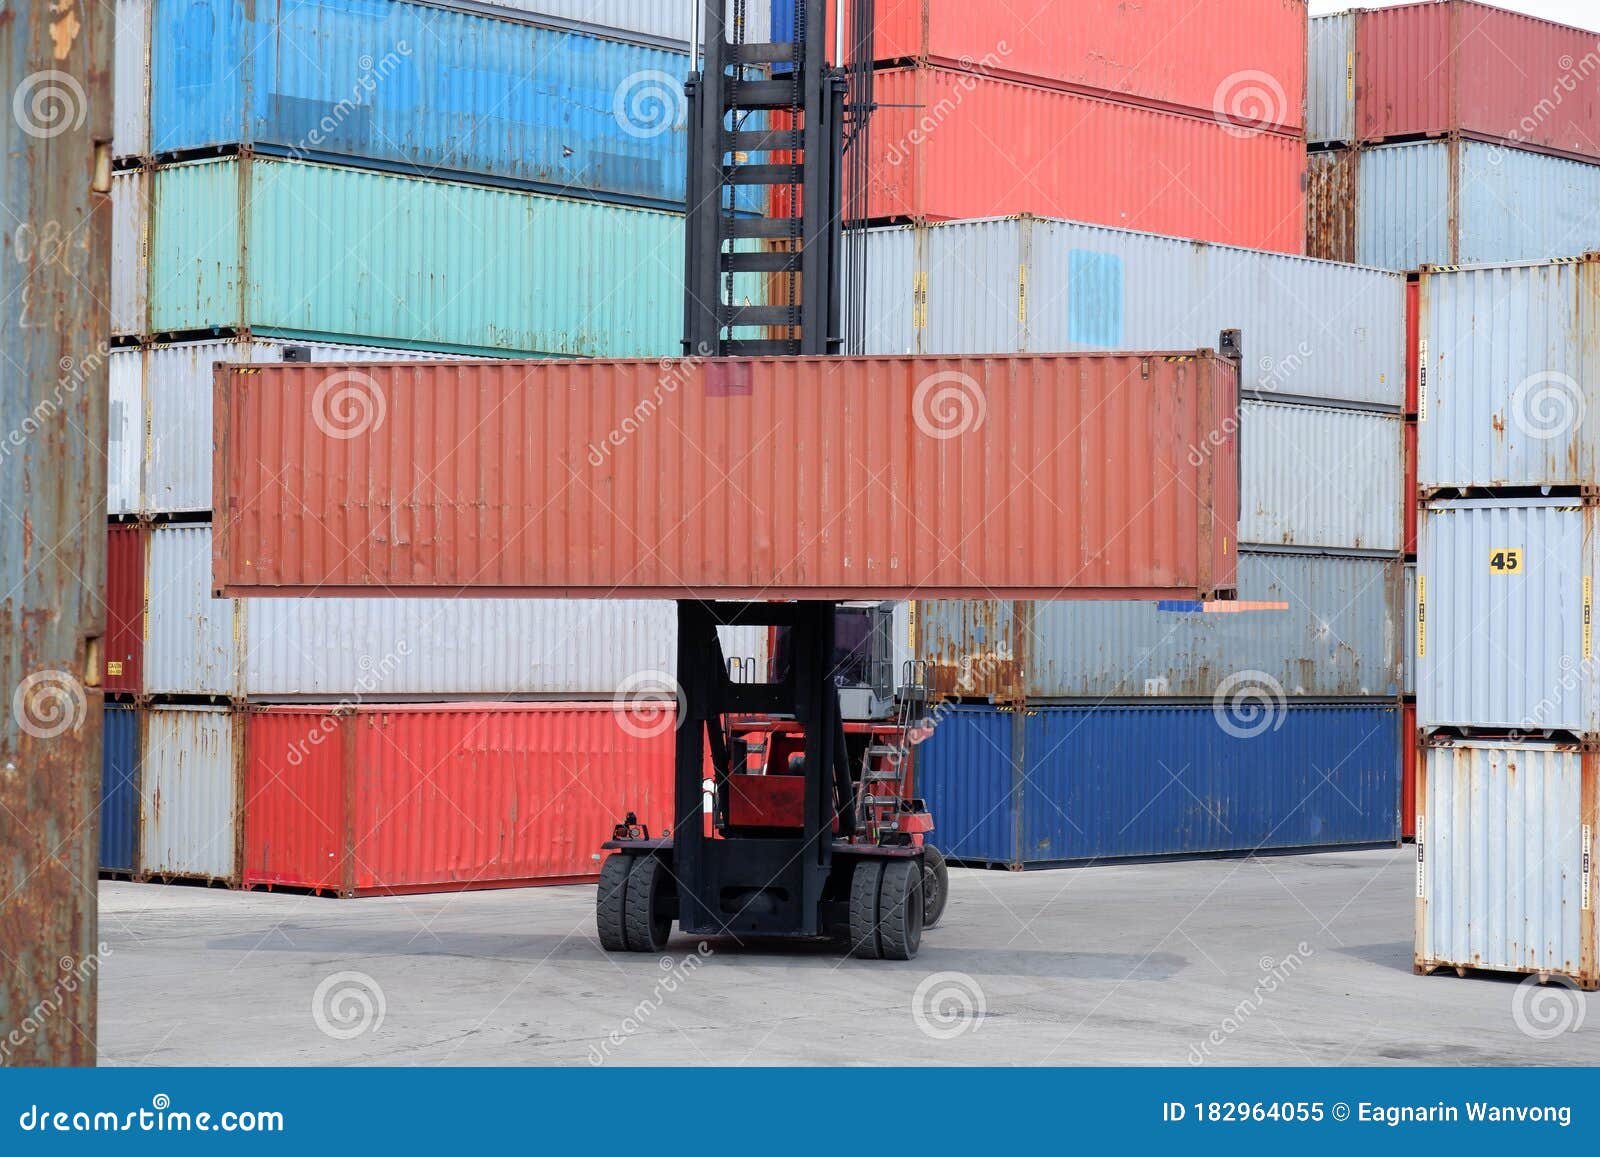 container handlers in exports and imports